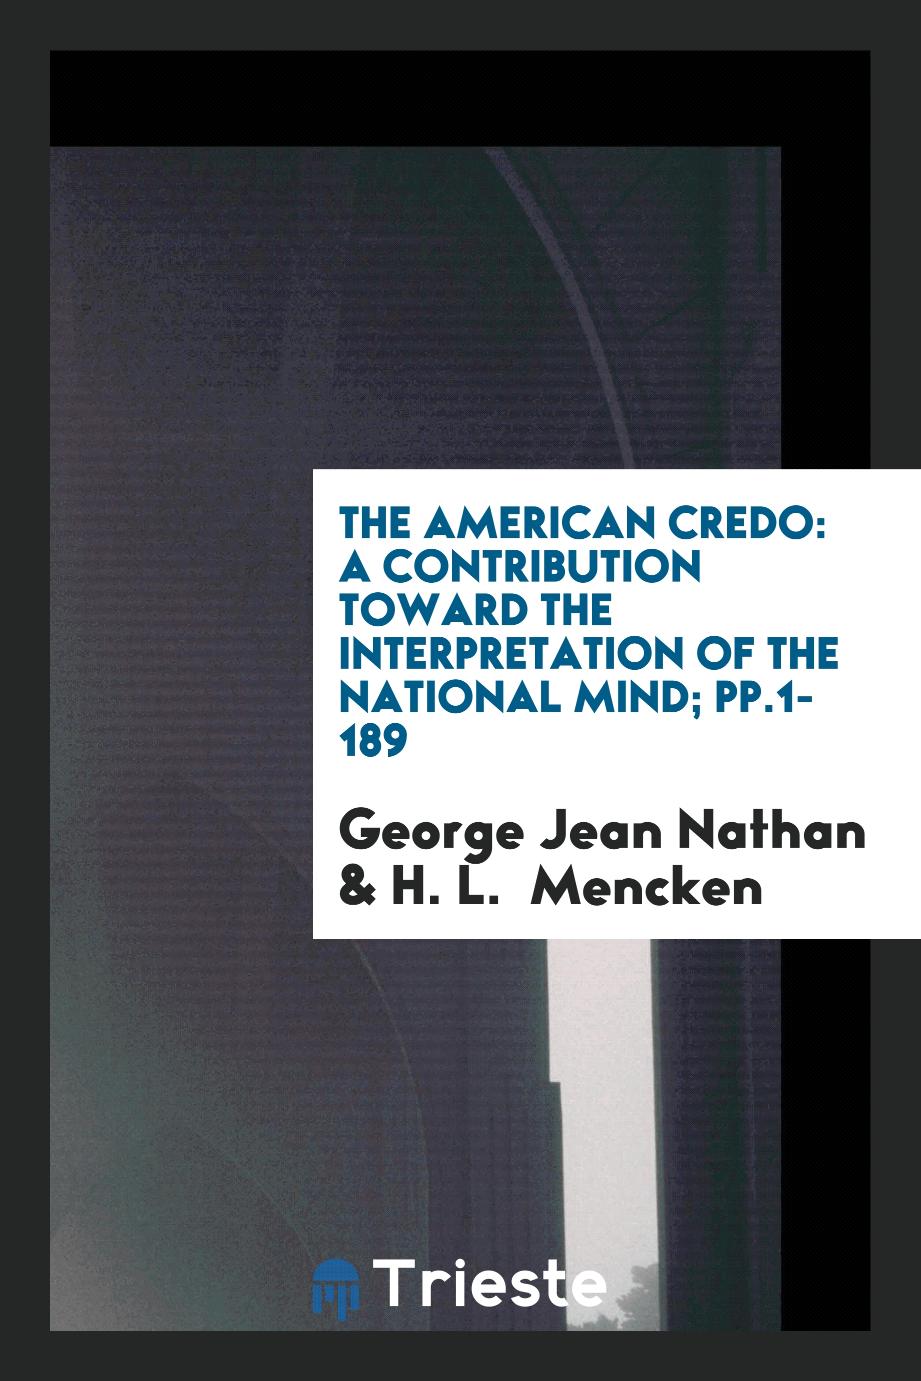 The American Credo: A Contribution toward the Interpretation of the National Mind; pp.1-189